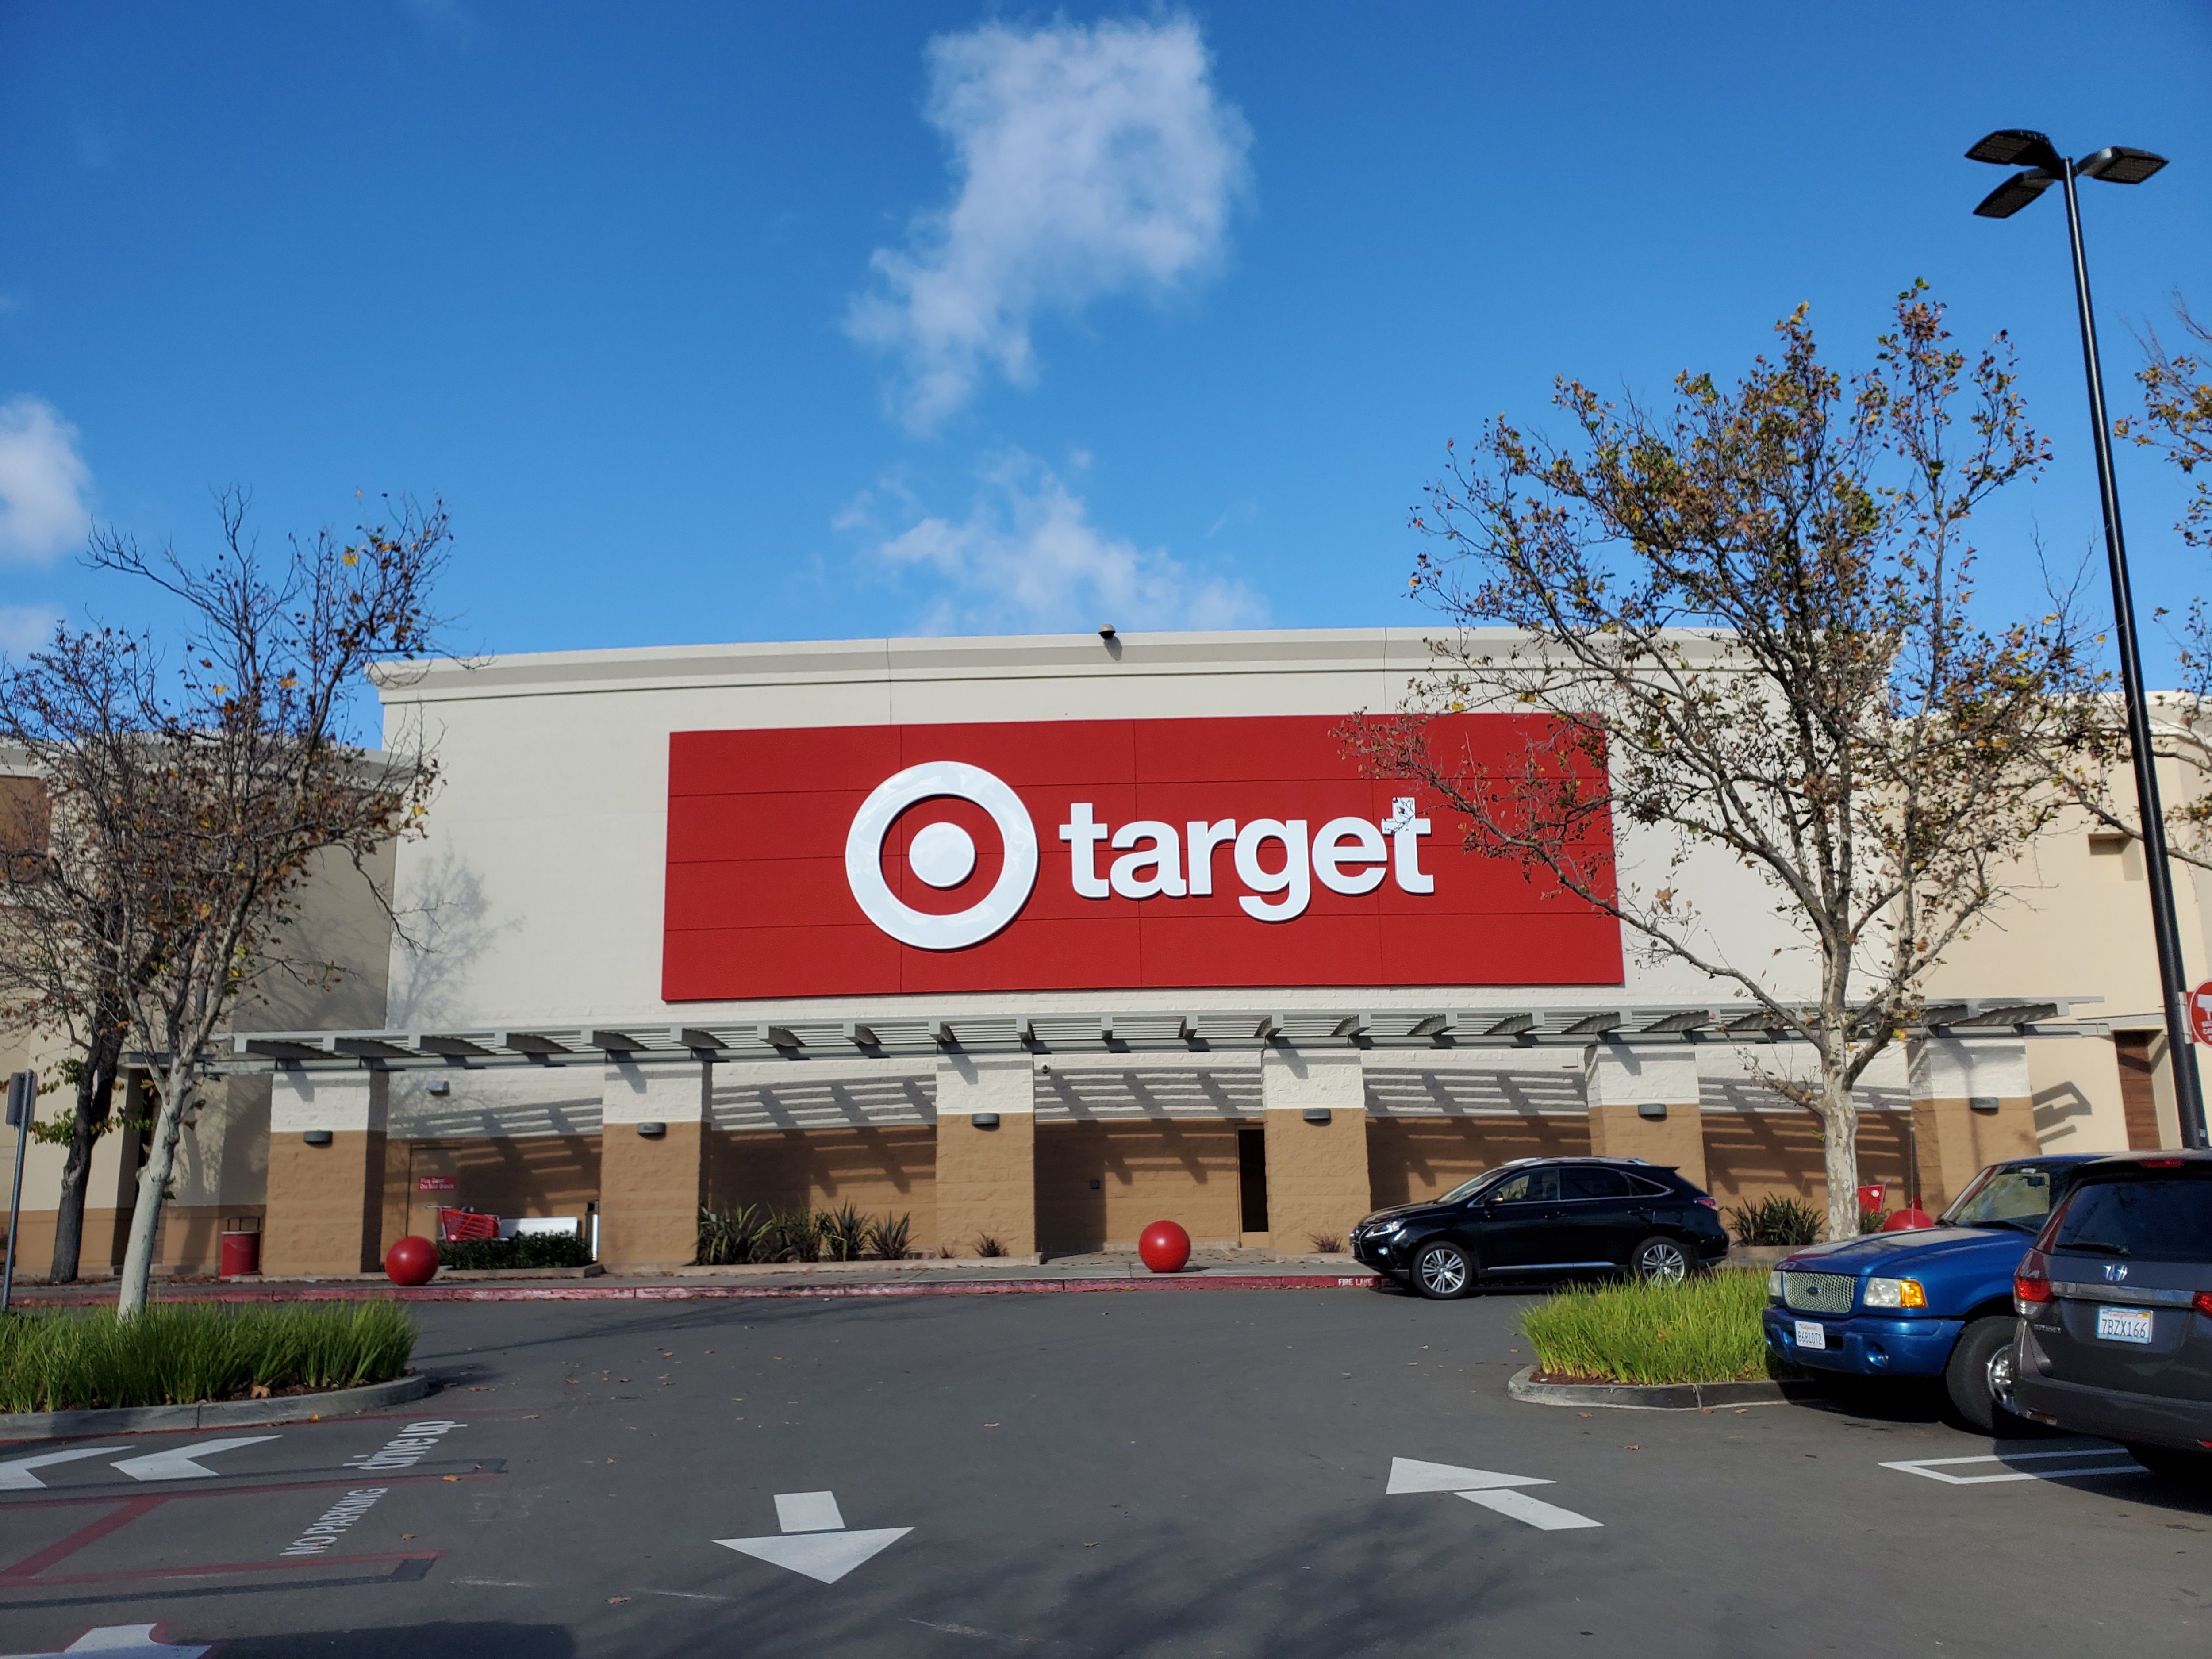 Facade with logo at Target retail store on a sunny day in San Ramon on December 15, 2019 | Photo: Getty Images